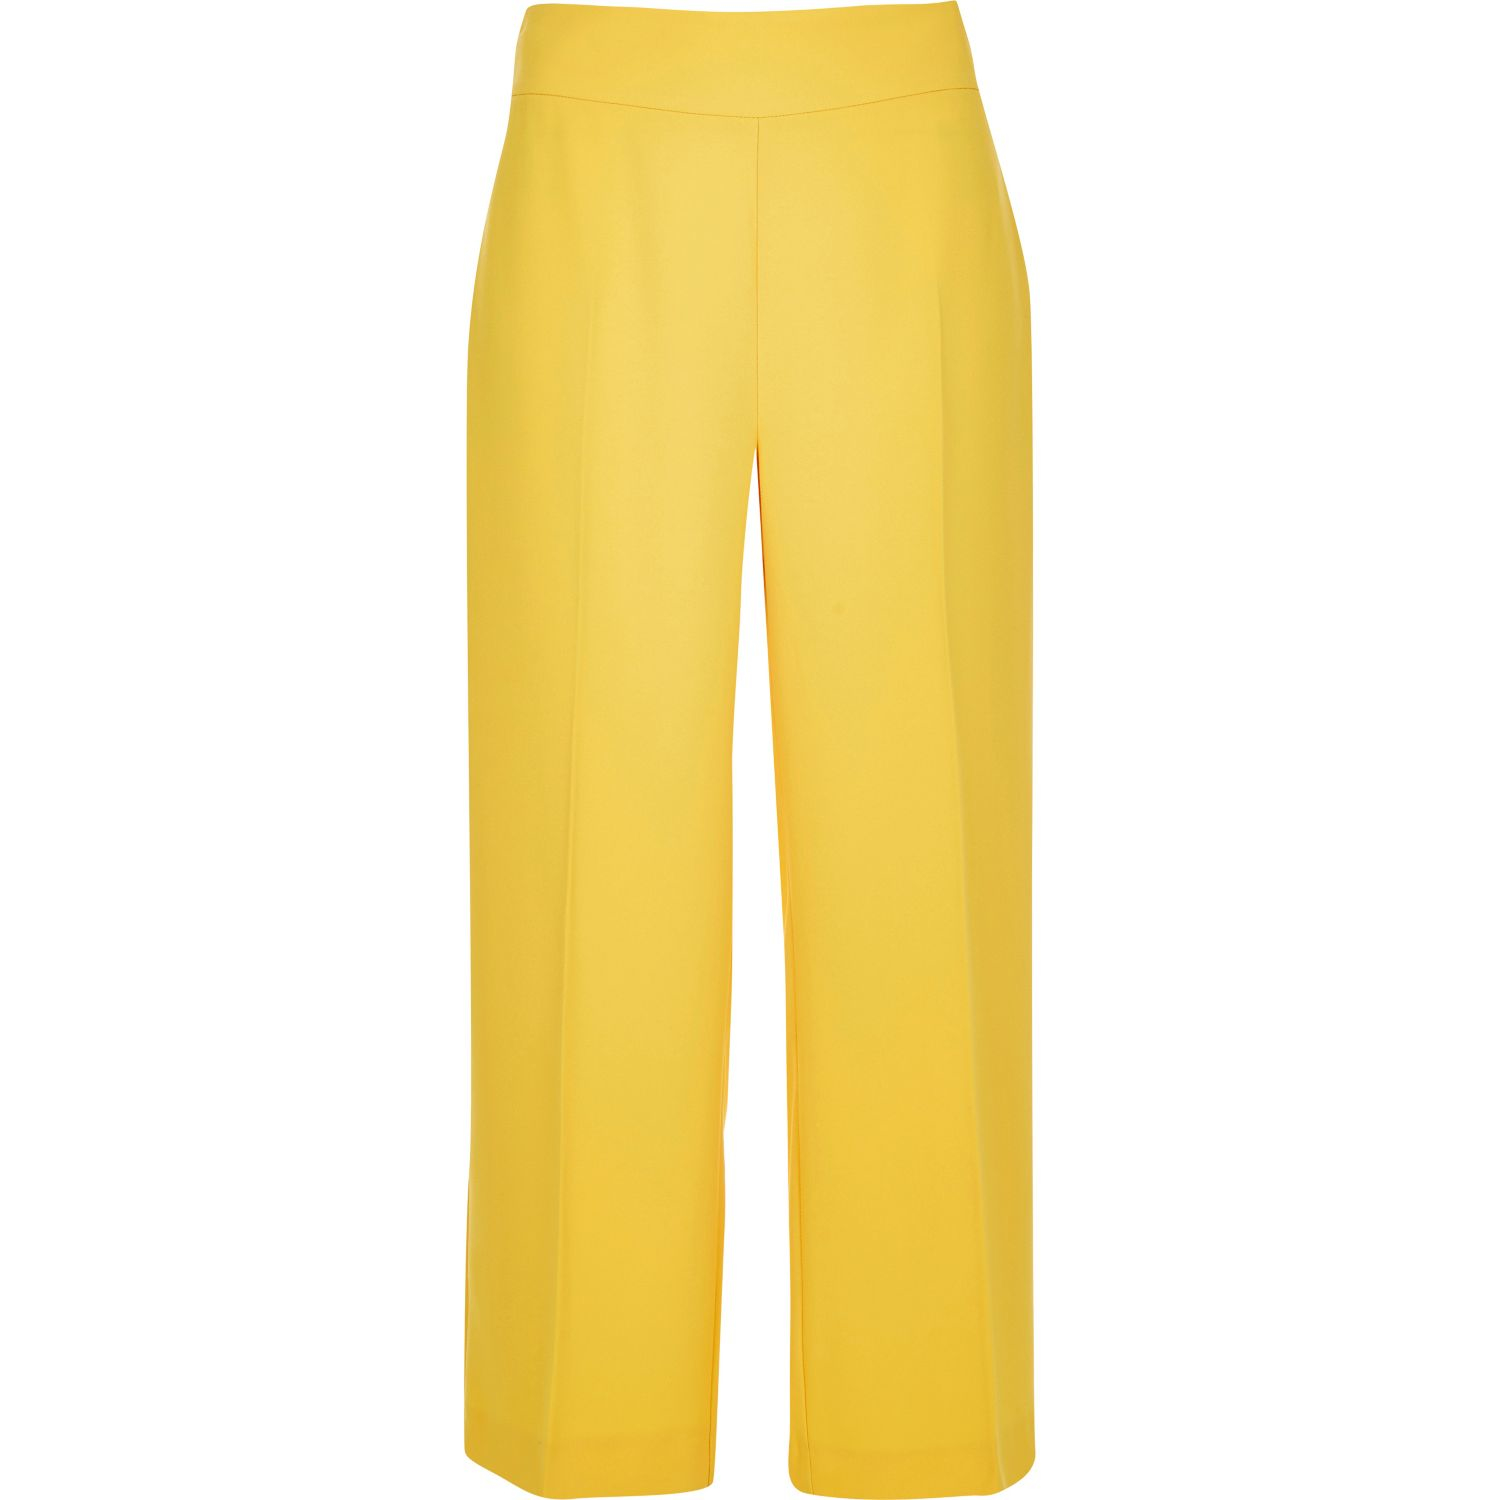 Lyst - River Island Yellow Cropped Wide Leg Pants in Yellow